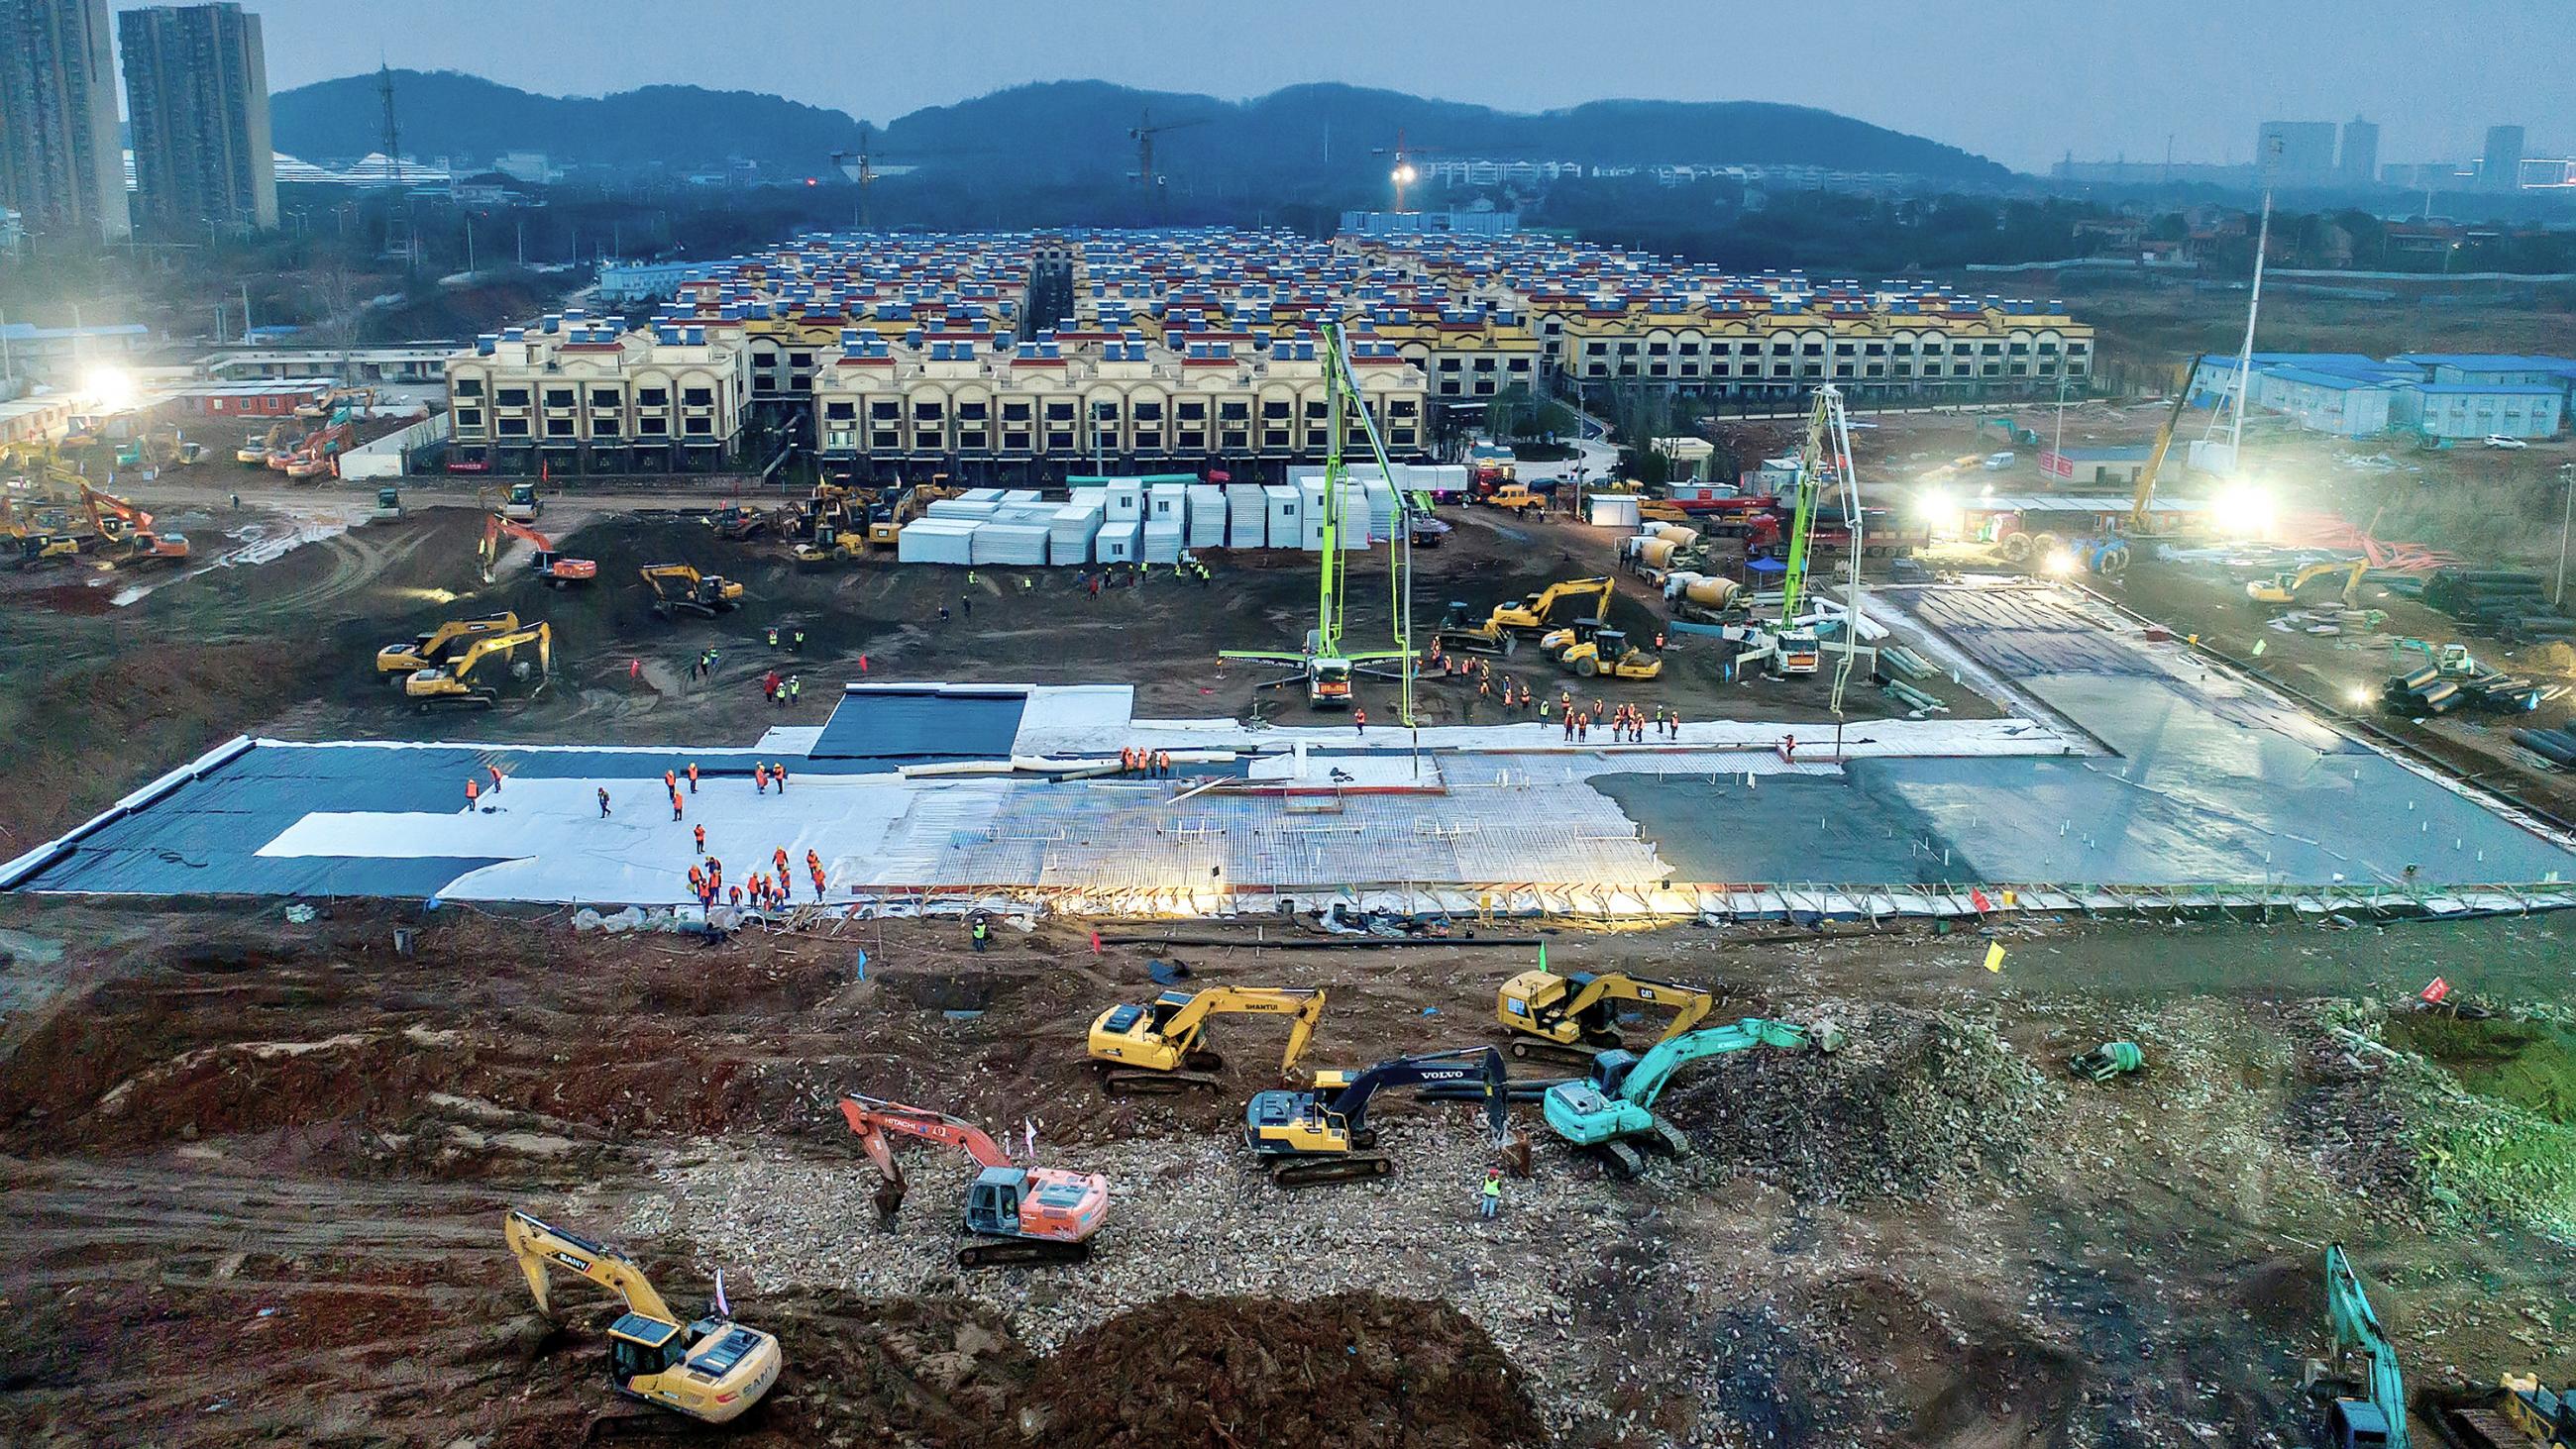 Picture is an aerial view of a massive construction site awash in activity with people and earth moving machines. 